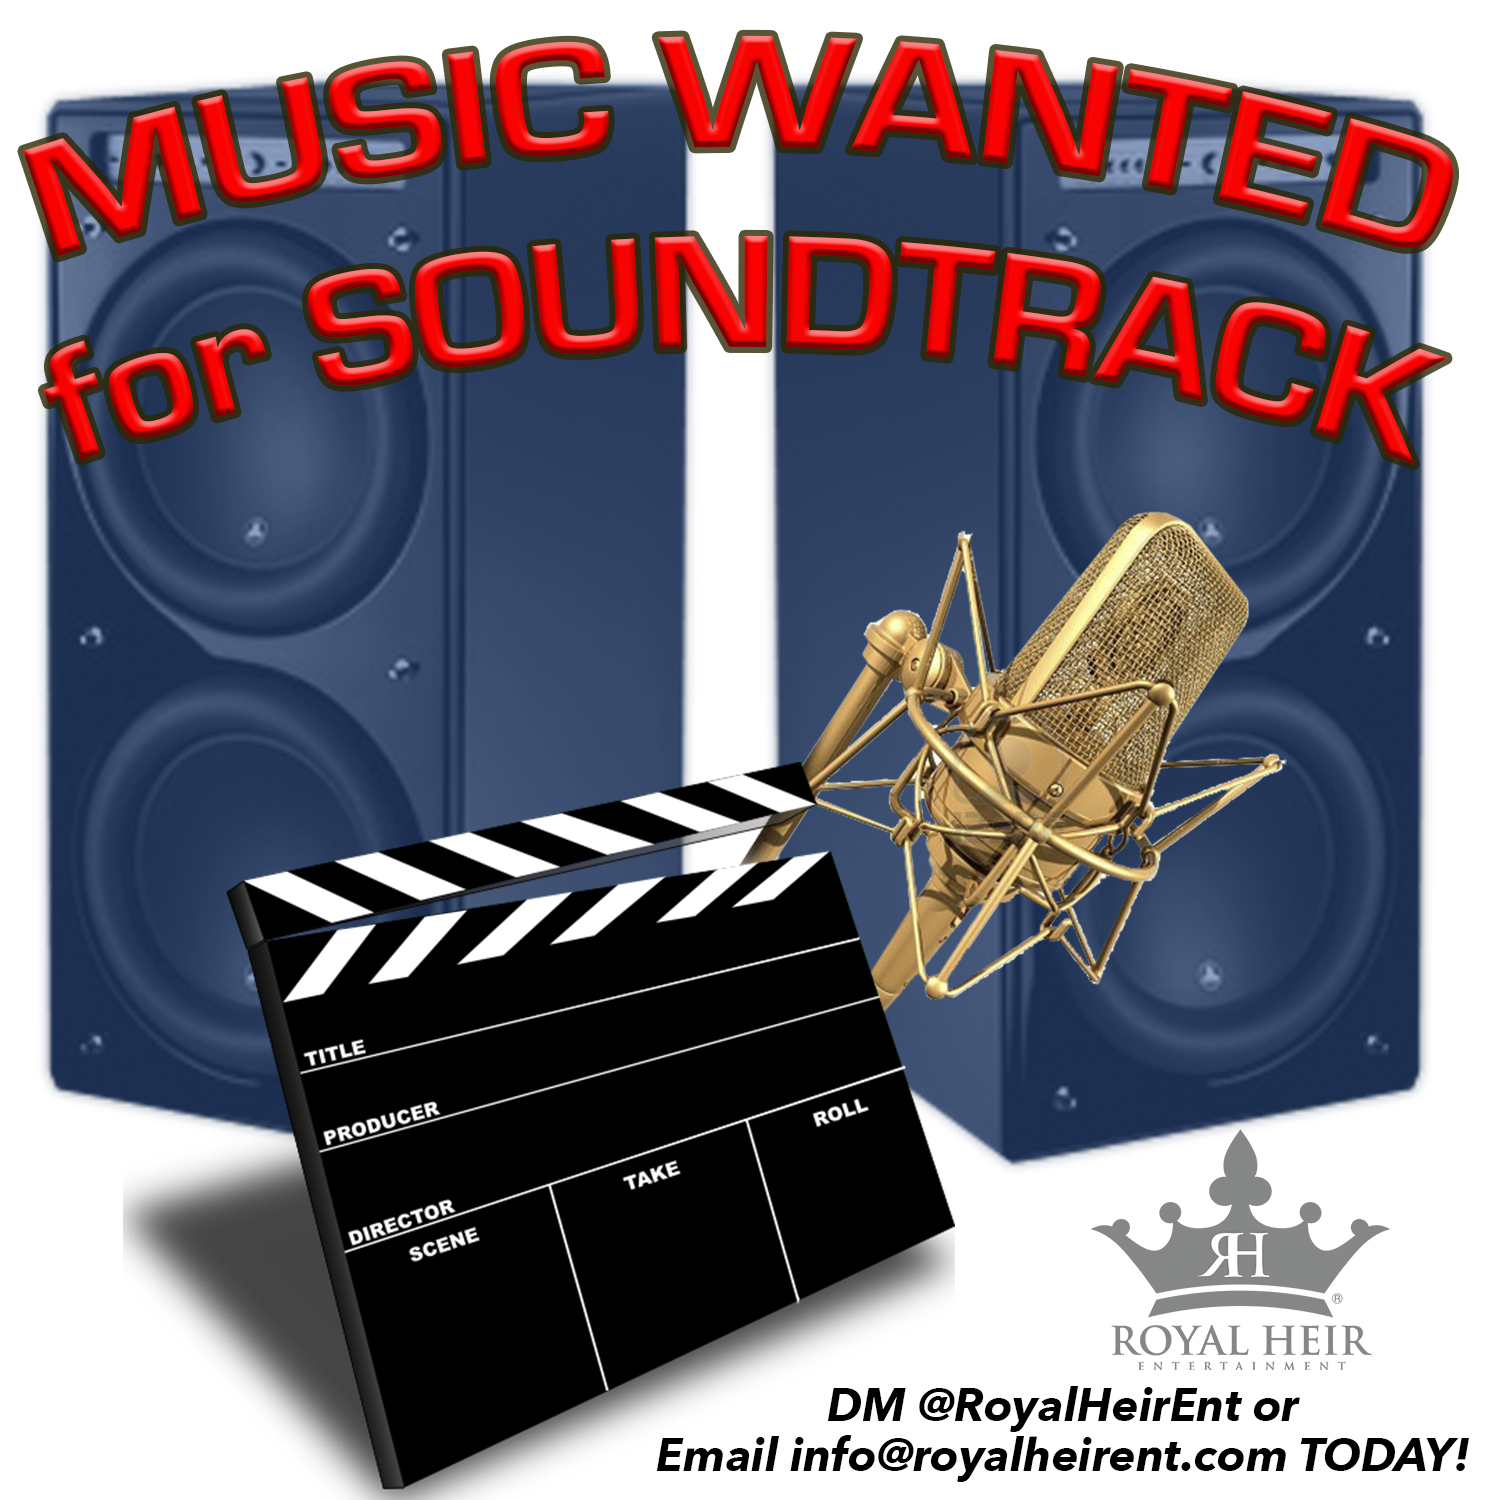 Soundtrack Wanted